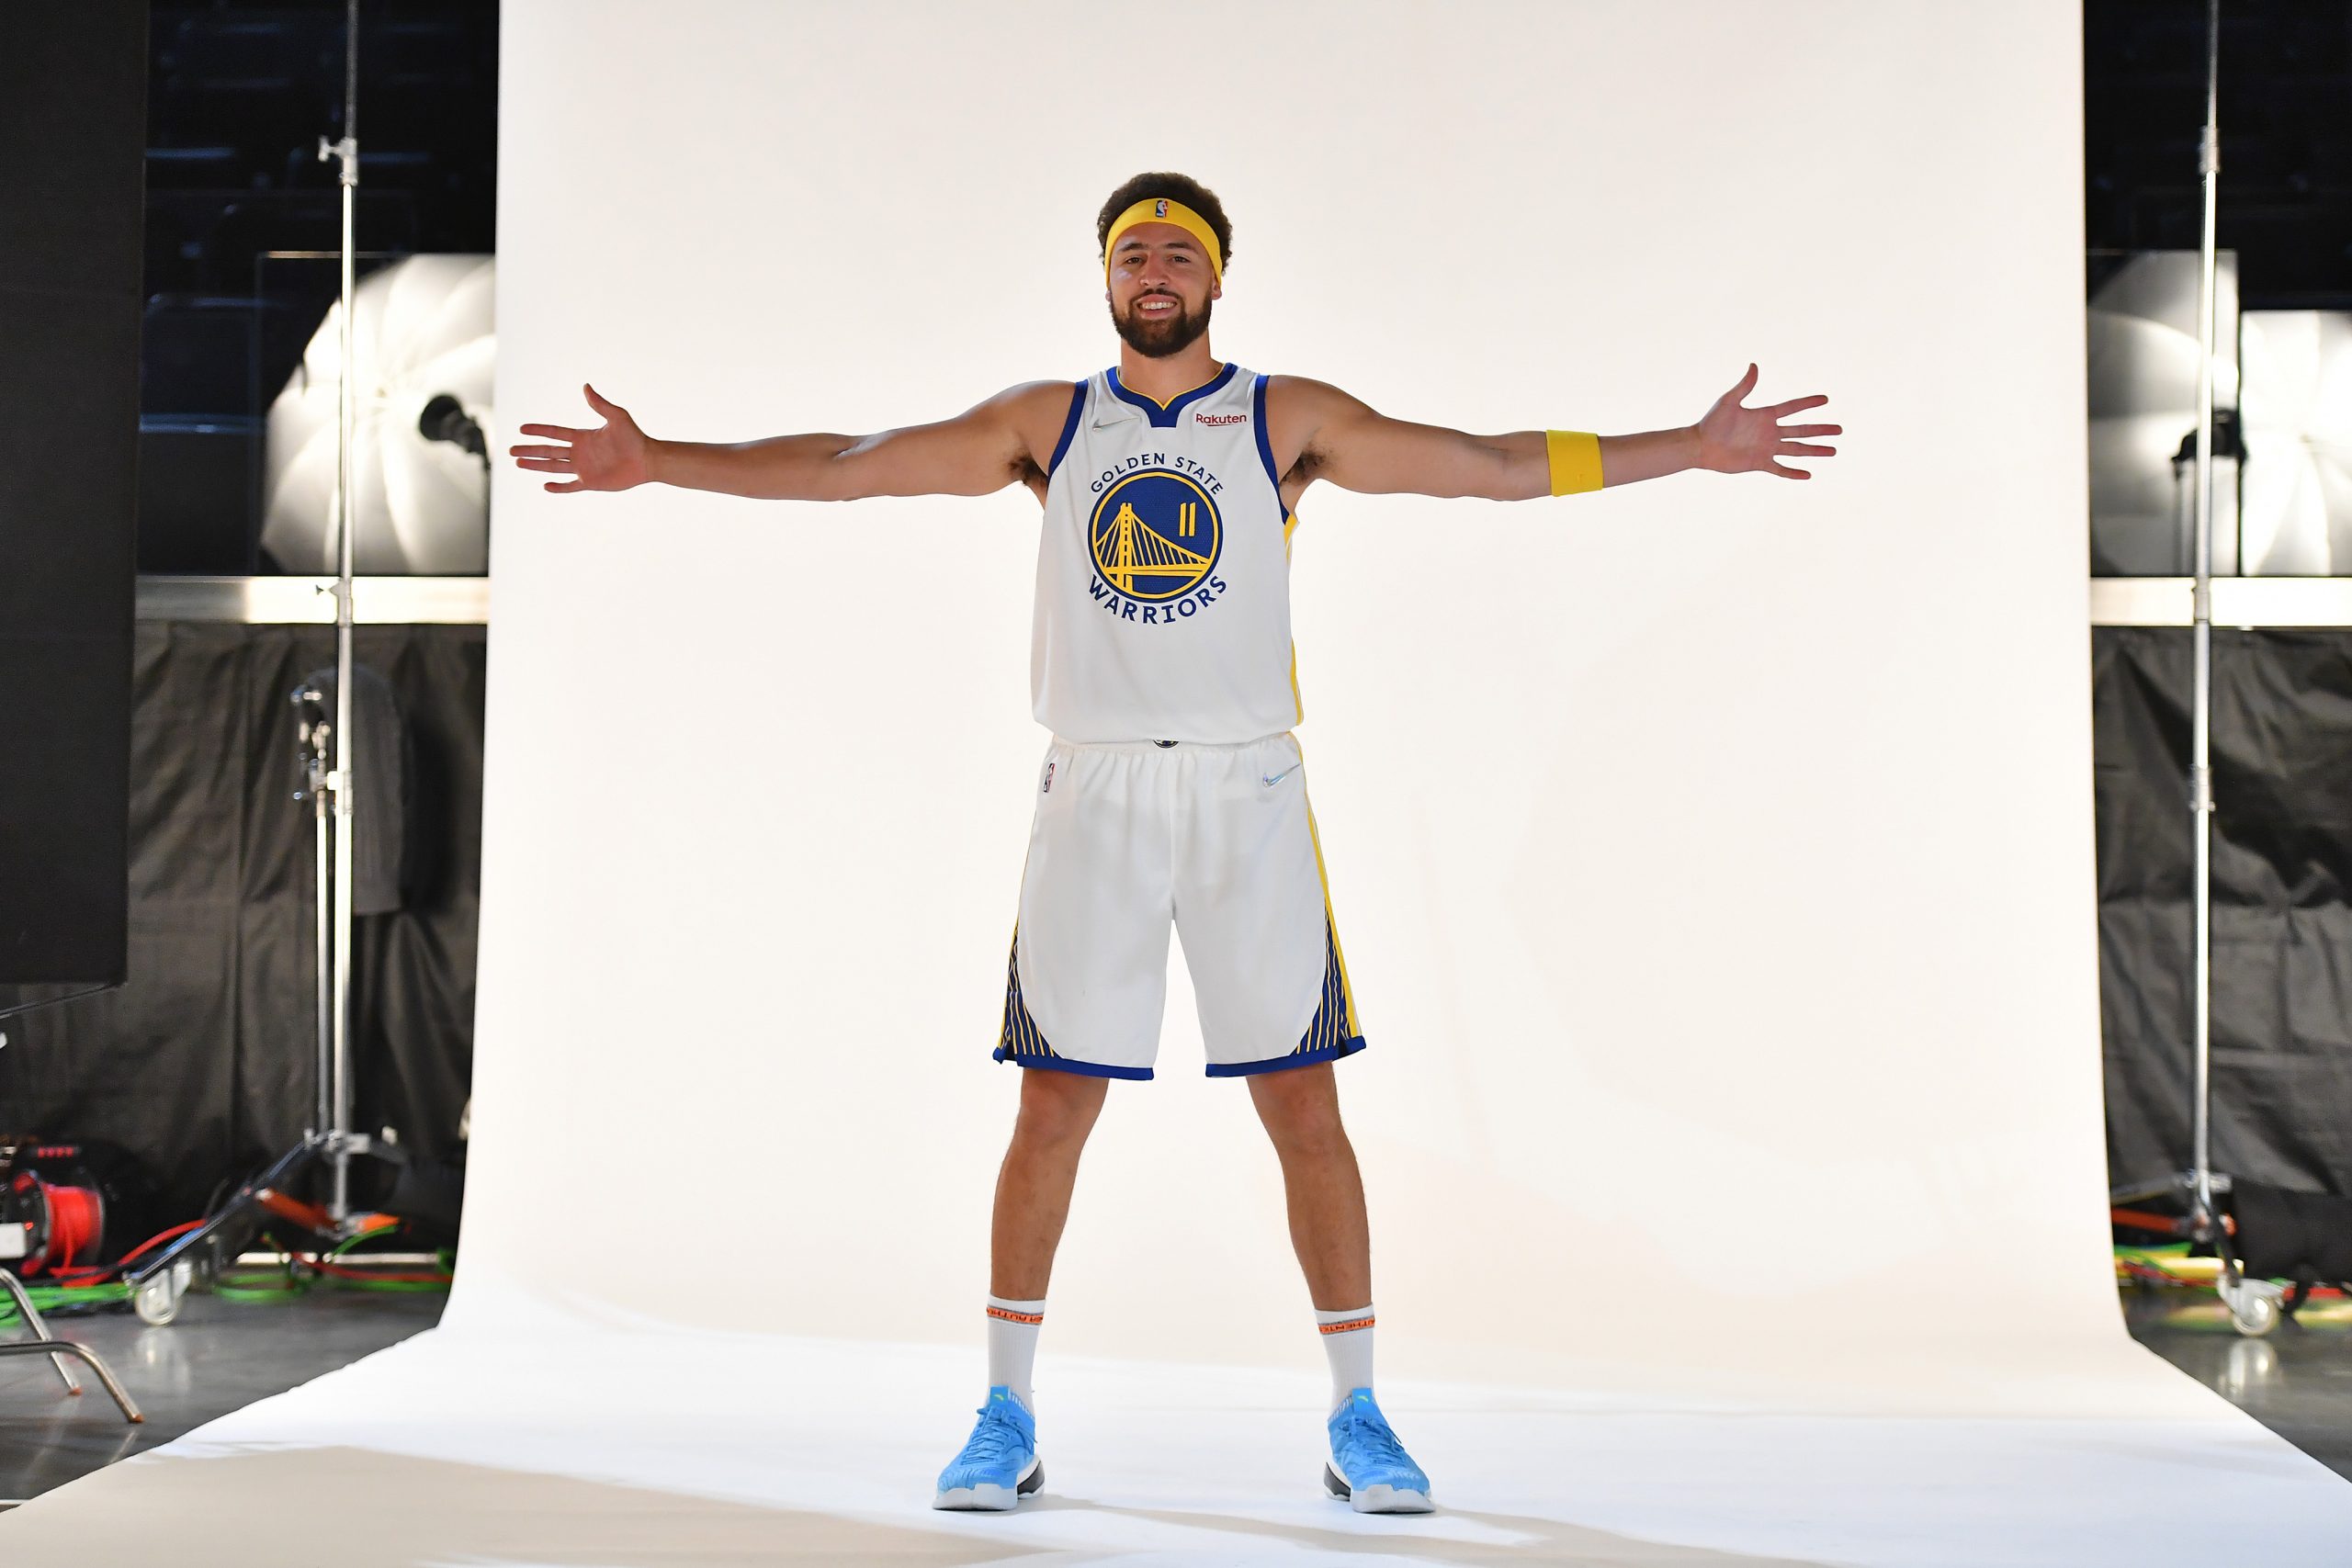 Golden State Warriors Klay Thompson poses for a photograph during media day.